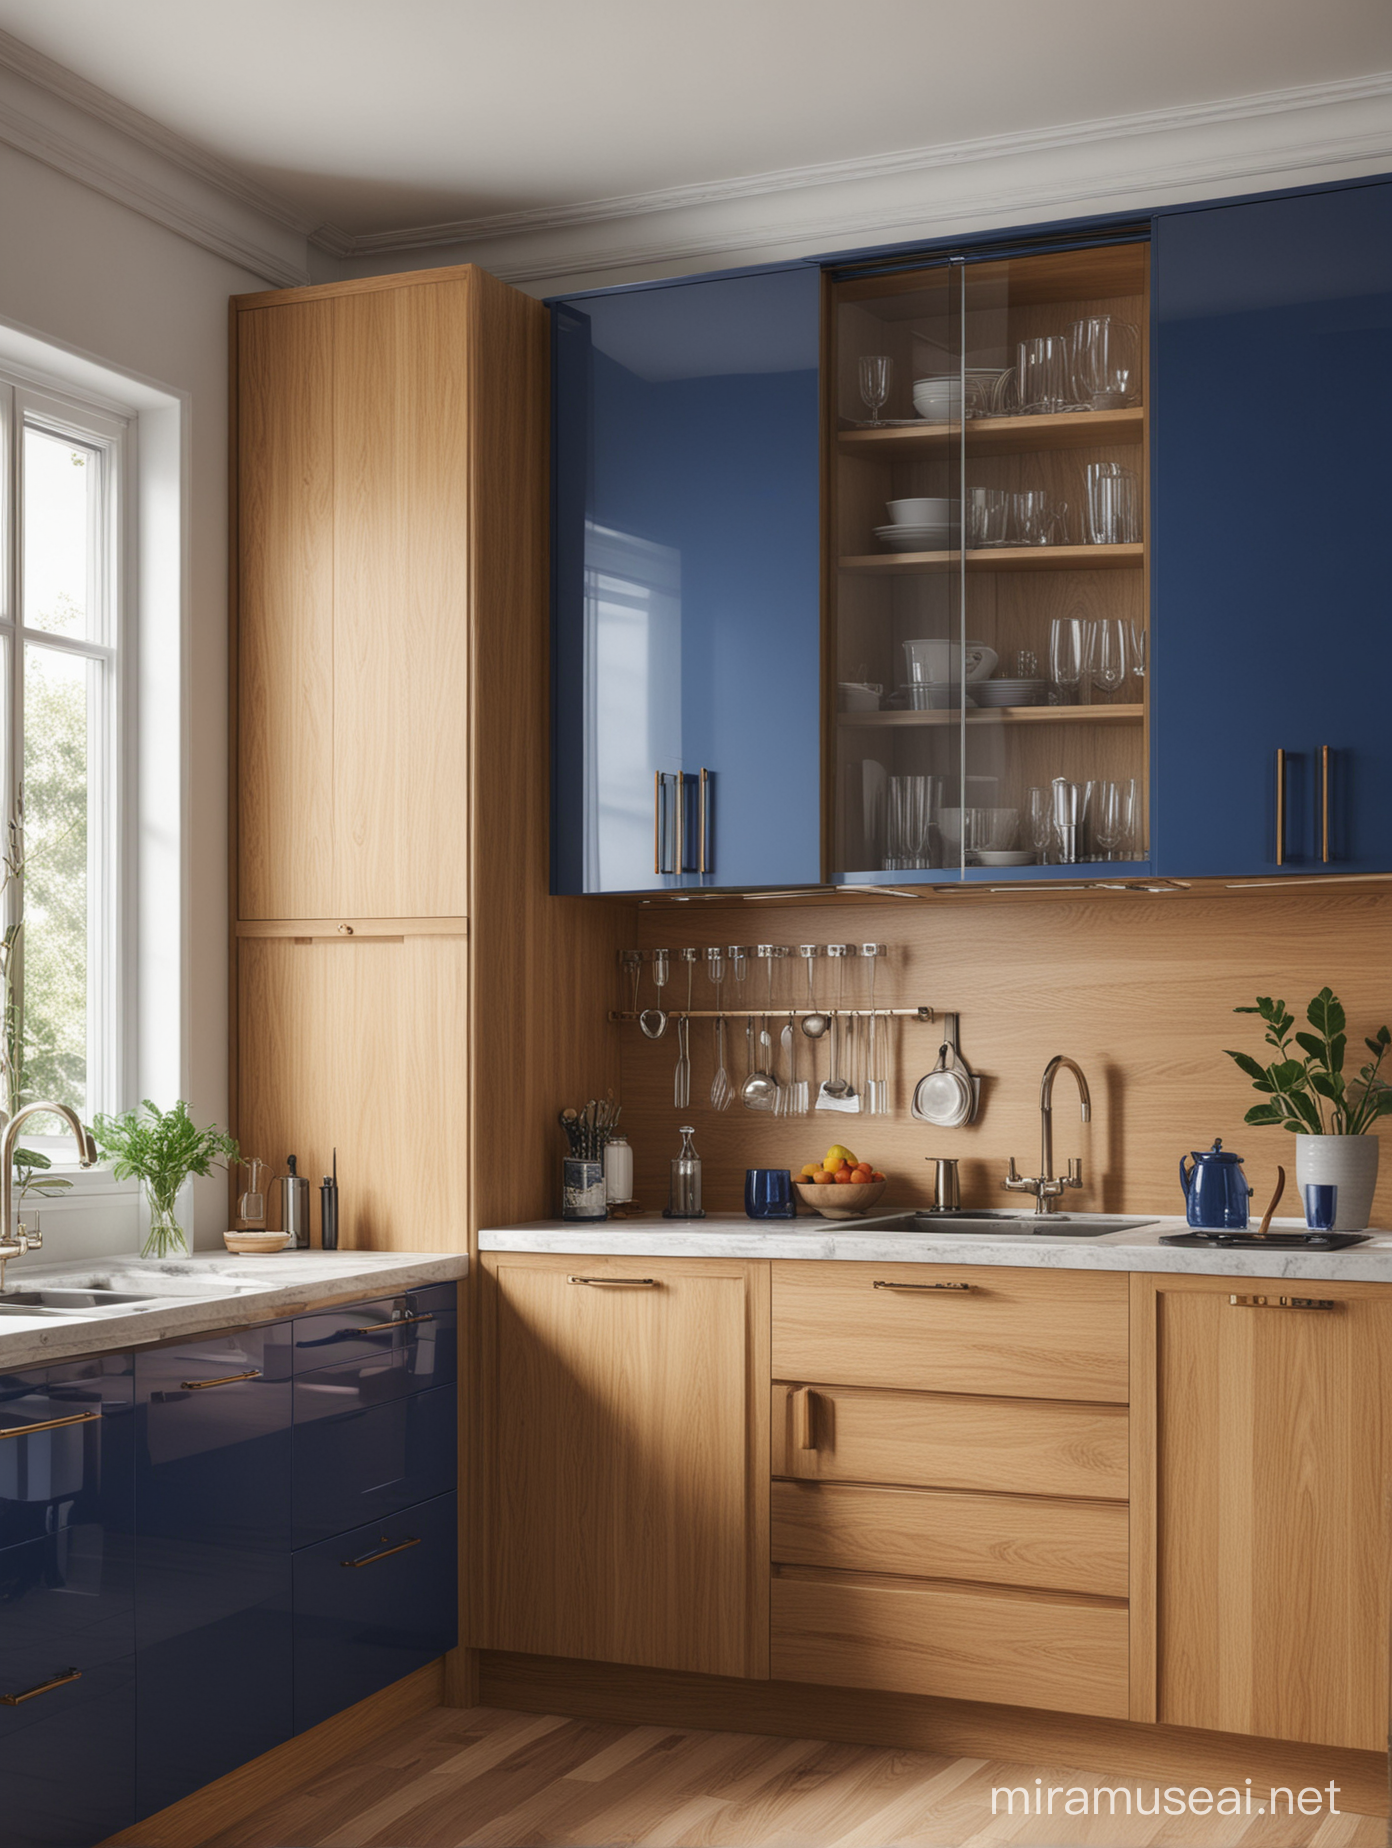 Modern Retro Kitchen Design with Cobalt Blue Lower Cabinets and Glass Ornamented Upper Cabinets